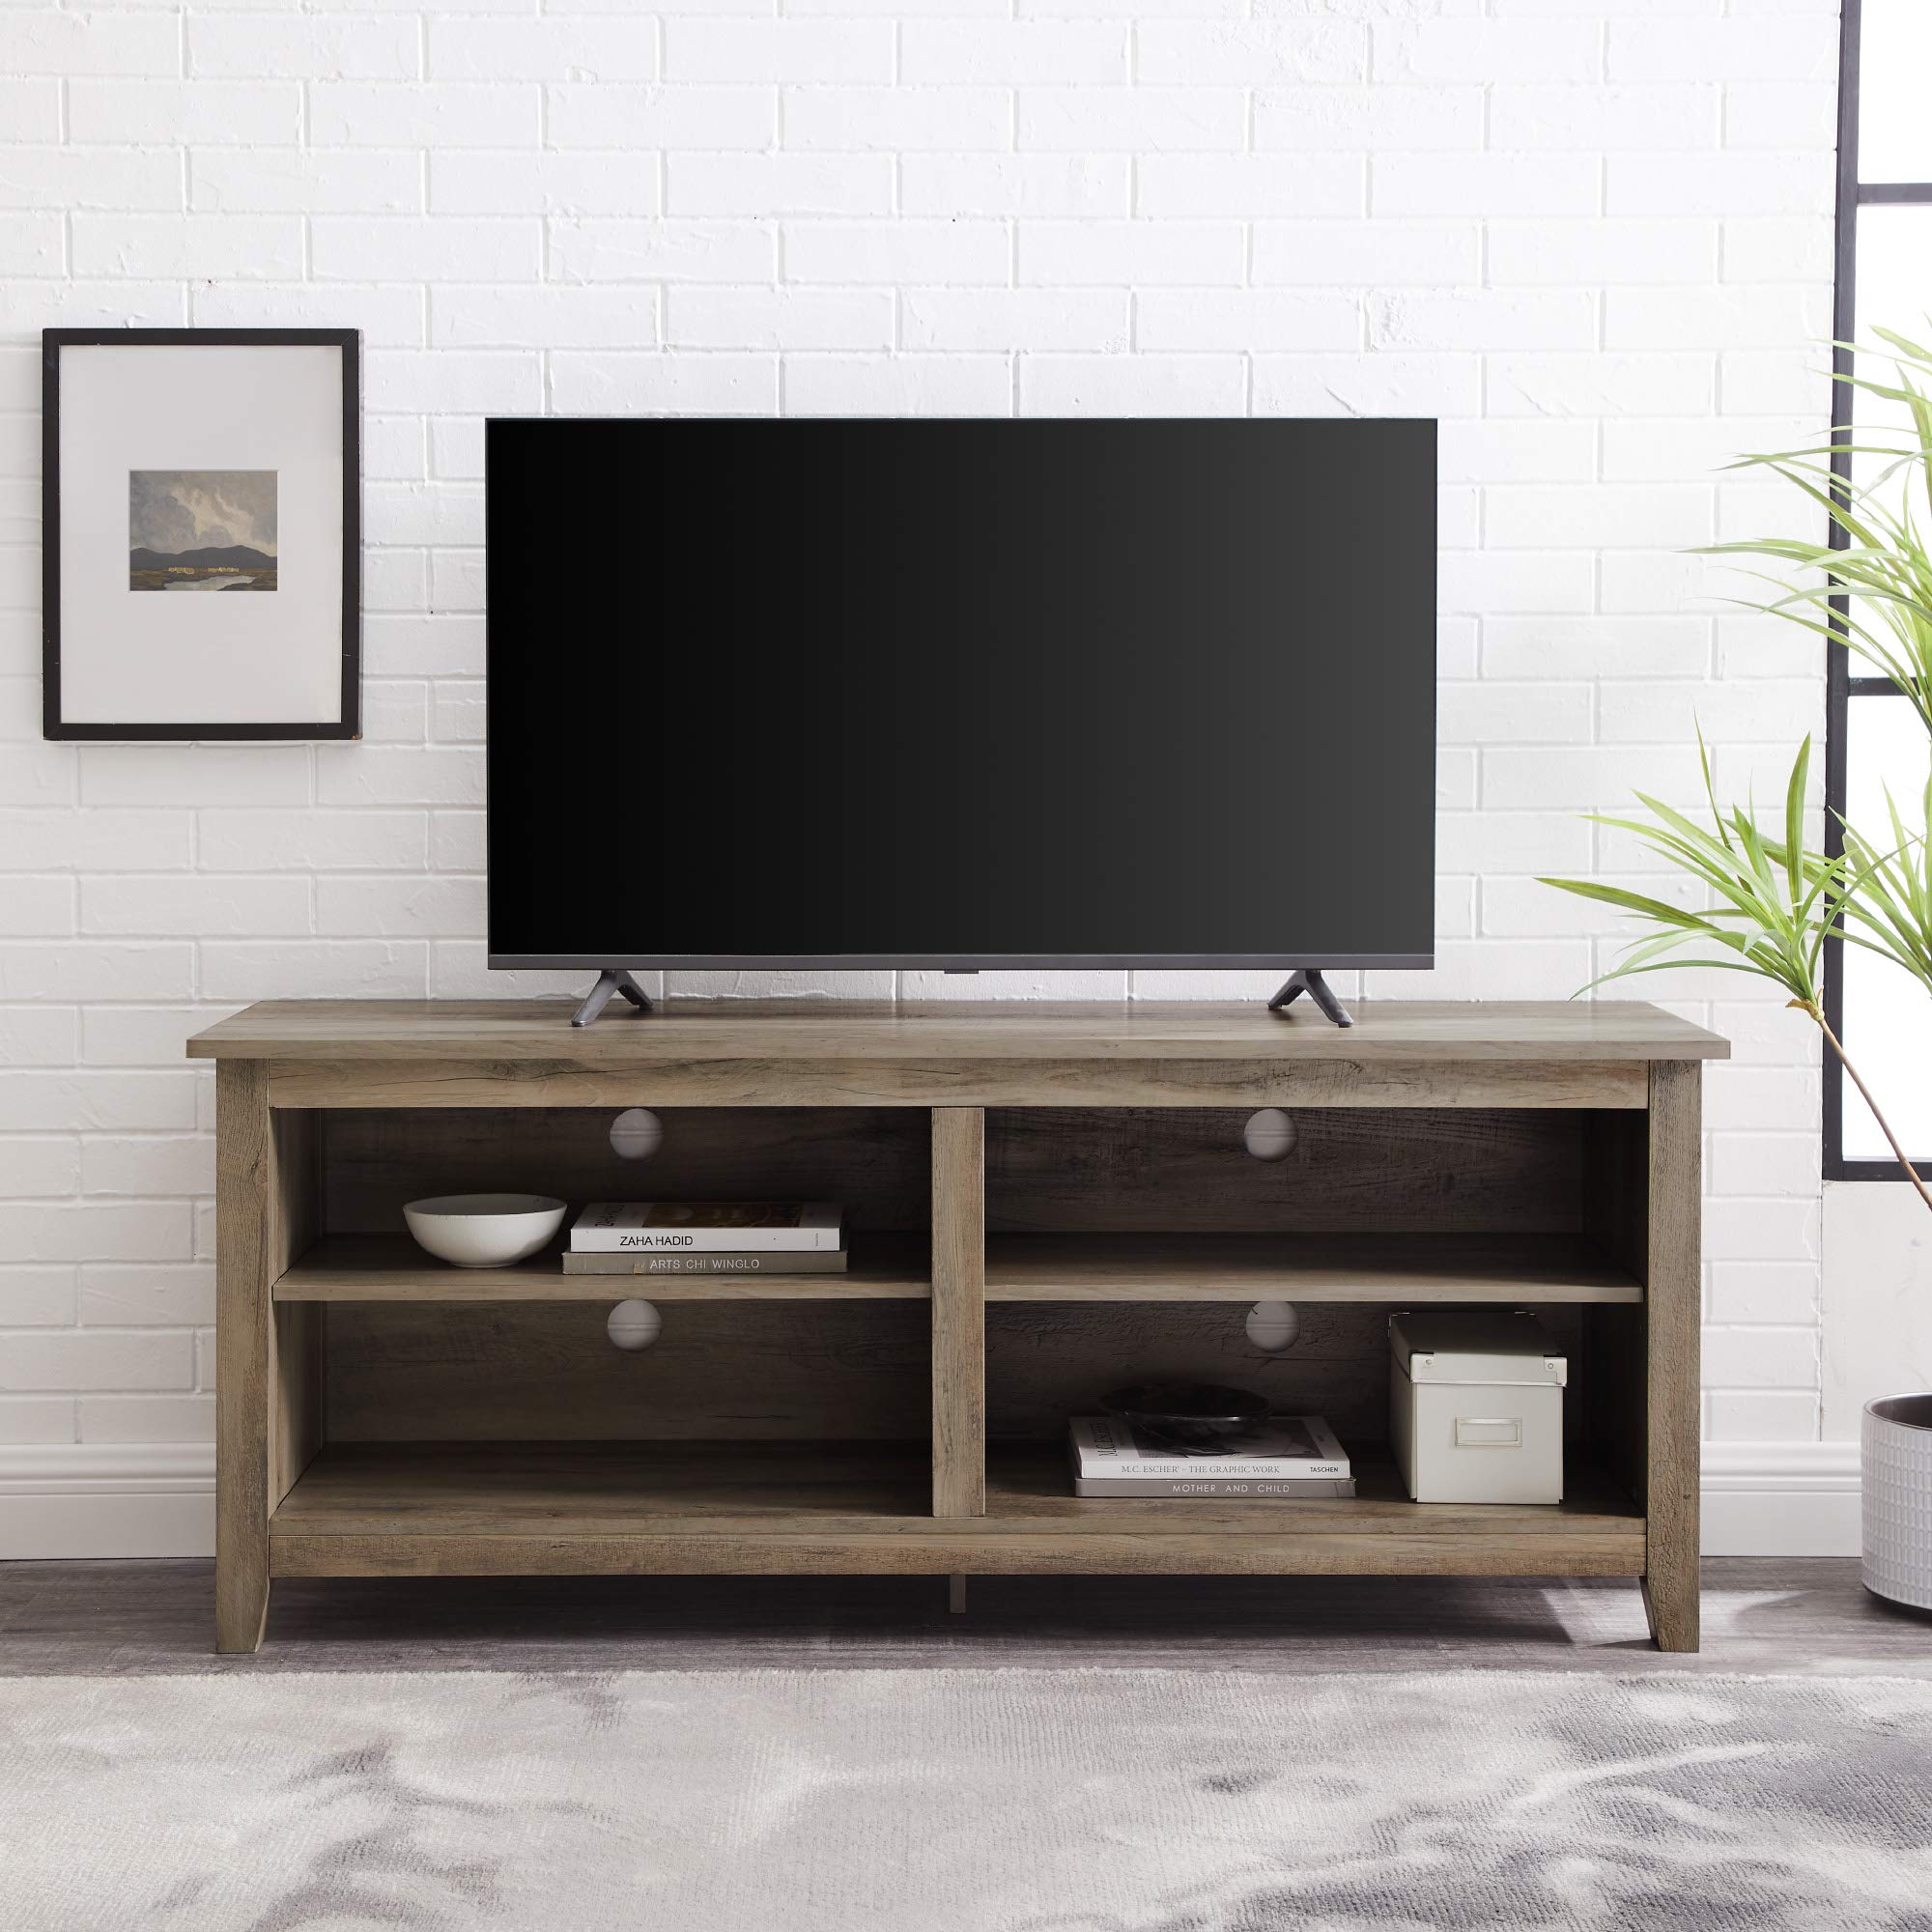 58" Walker Edison Wren Classic 4 Cubby TV Stand (Grey Wash) $95.99 + Free Shipping